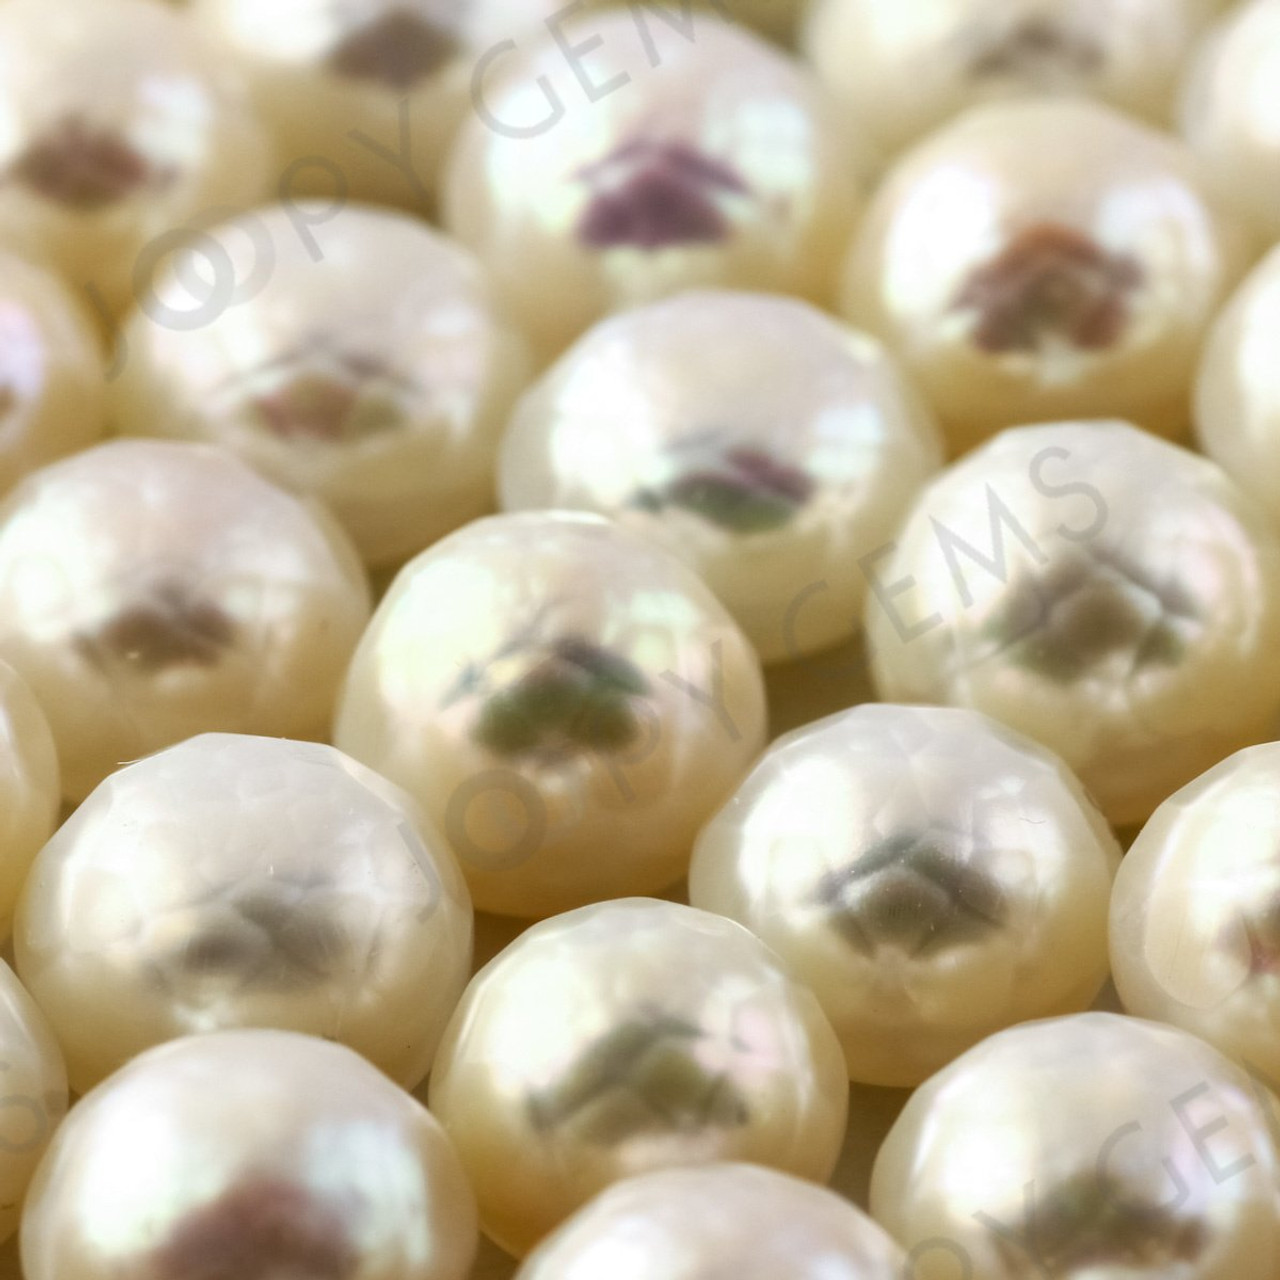 White Cultured Freshwater Pearls Half-Drilled Button 7.5-8mm ROSE CUT